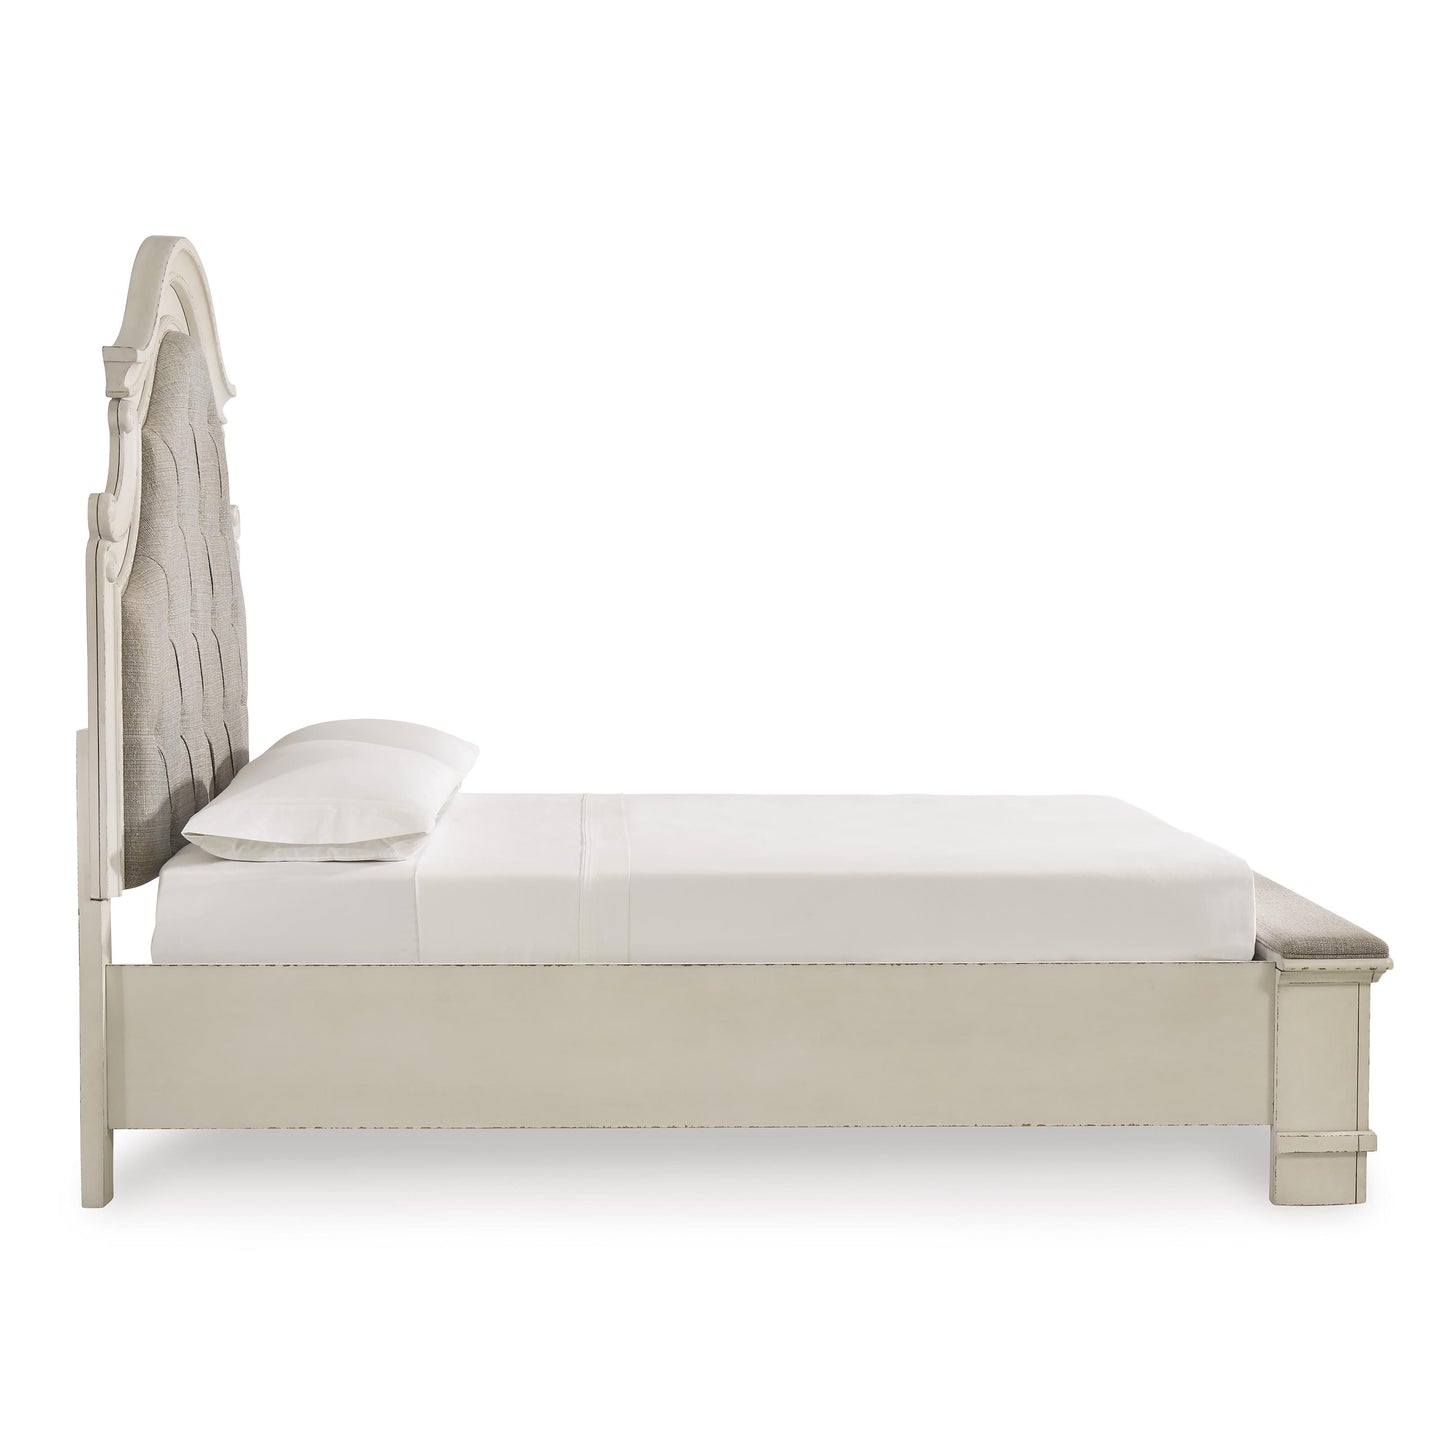 Signature Design by Ashley Realyn Queen Upholstered Platform Bed B743-57/B743-54S/B743-196 IMAGE 3